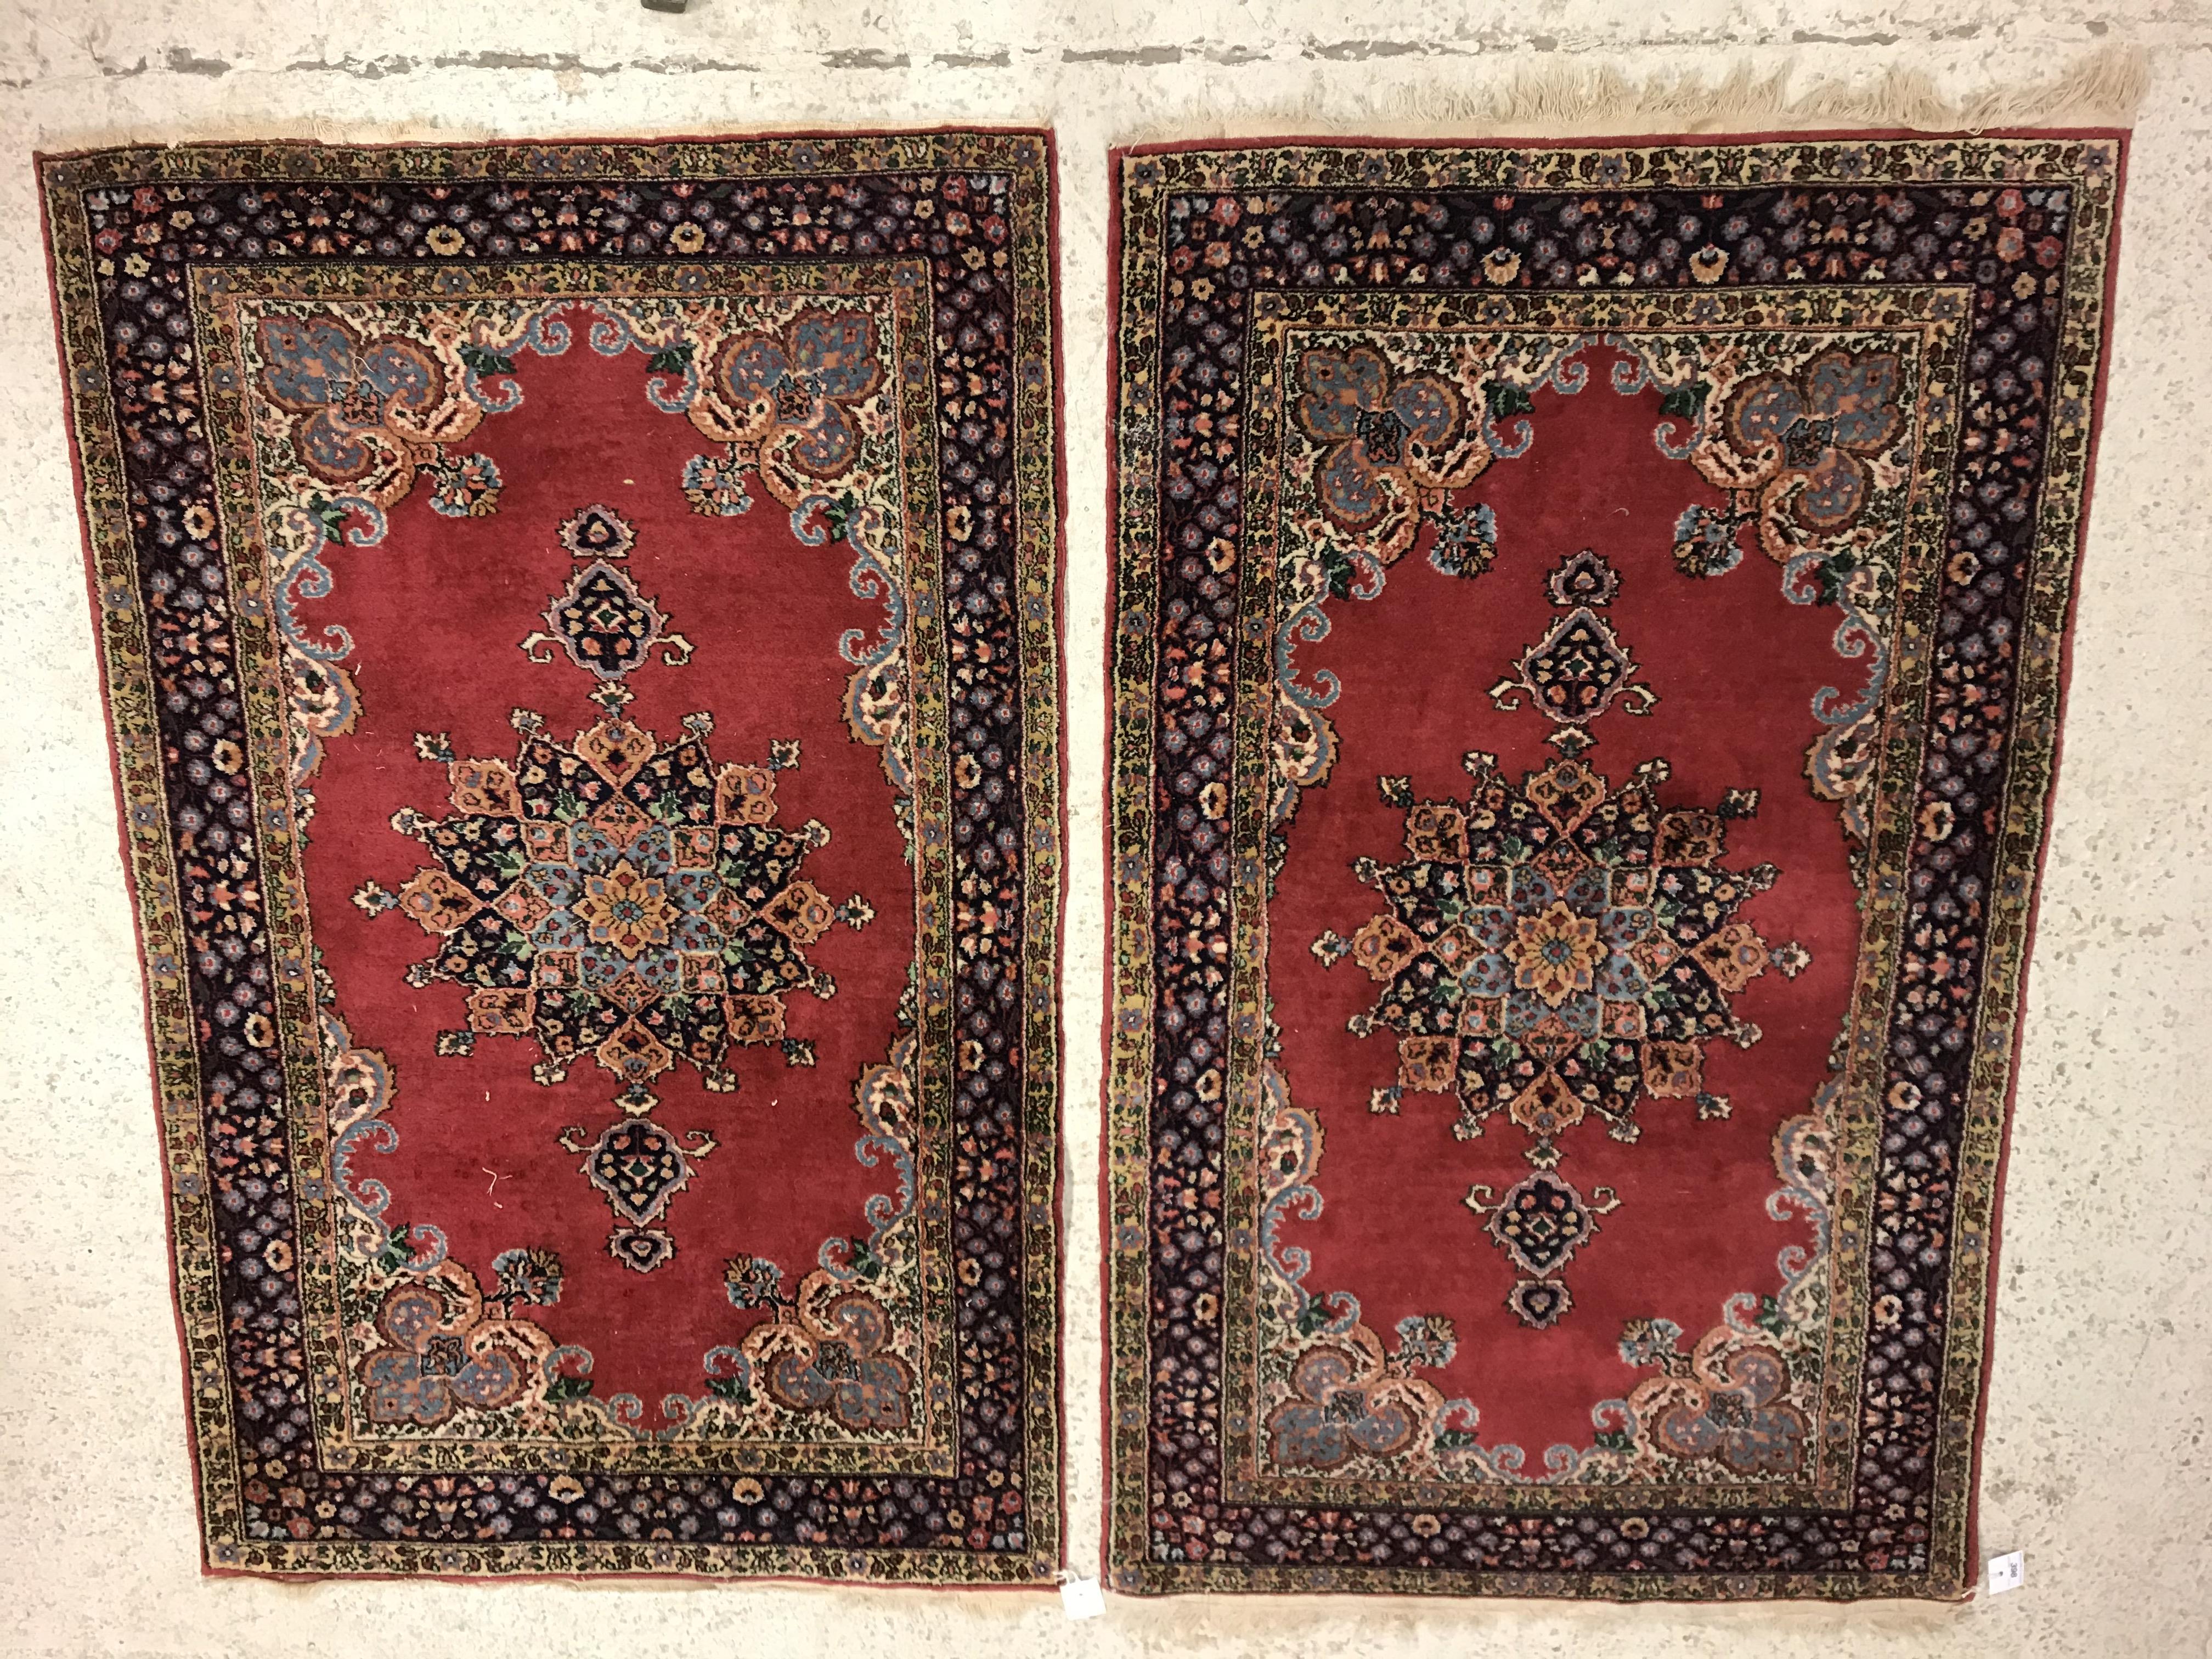 A pair of fine Oriental rugs, the central panels set with floral decorated circular medallion on a